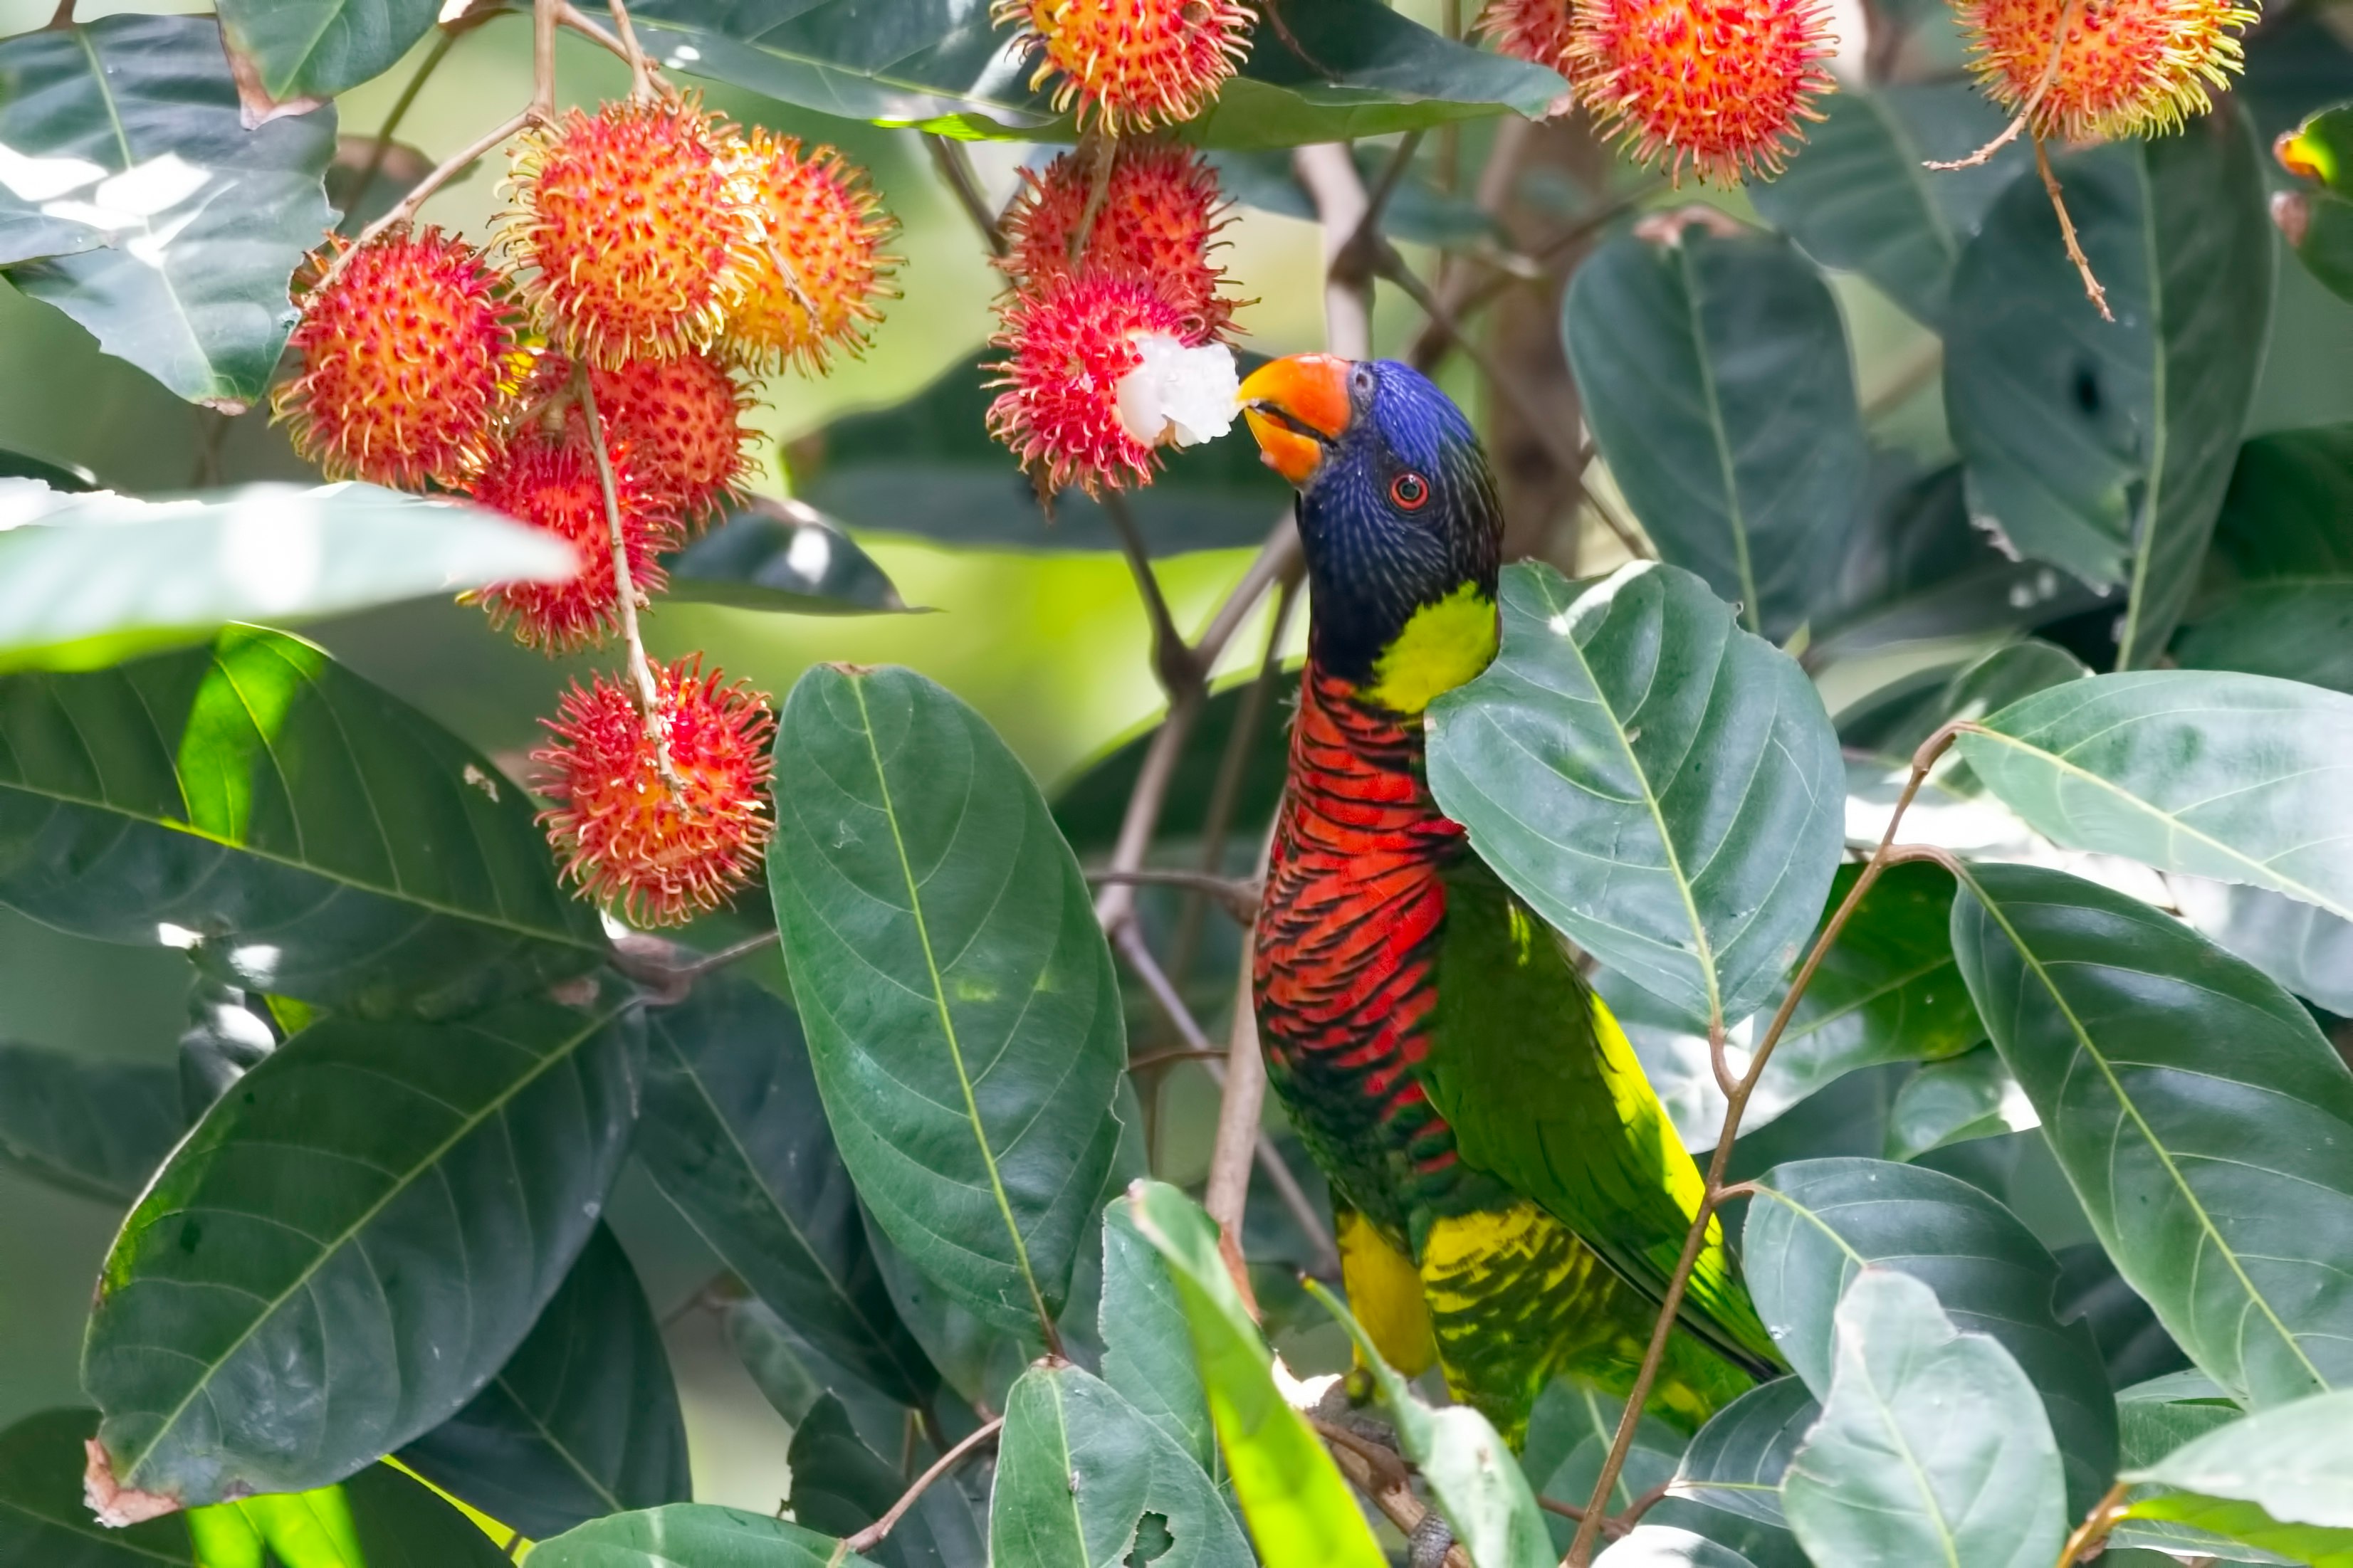 red, green, and blue parrot eating rambutan